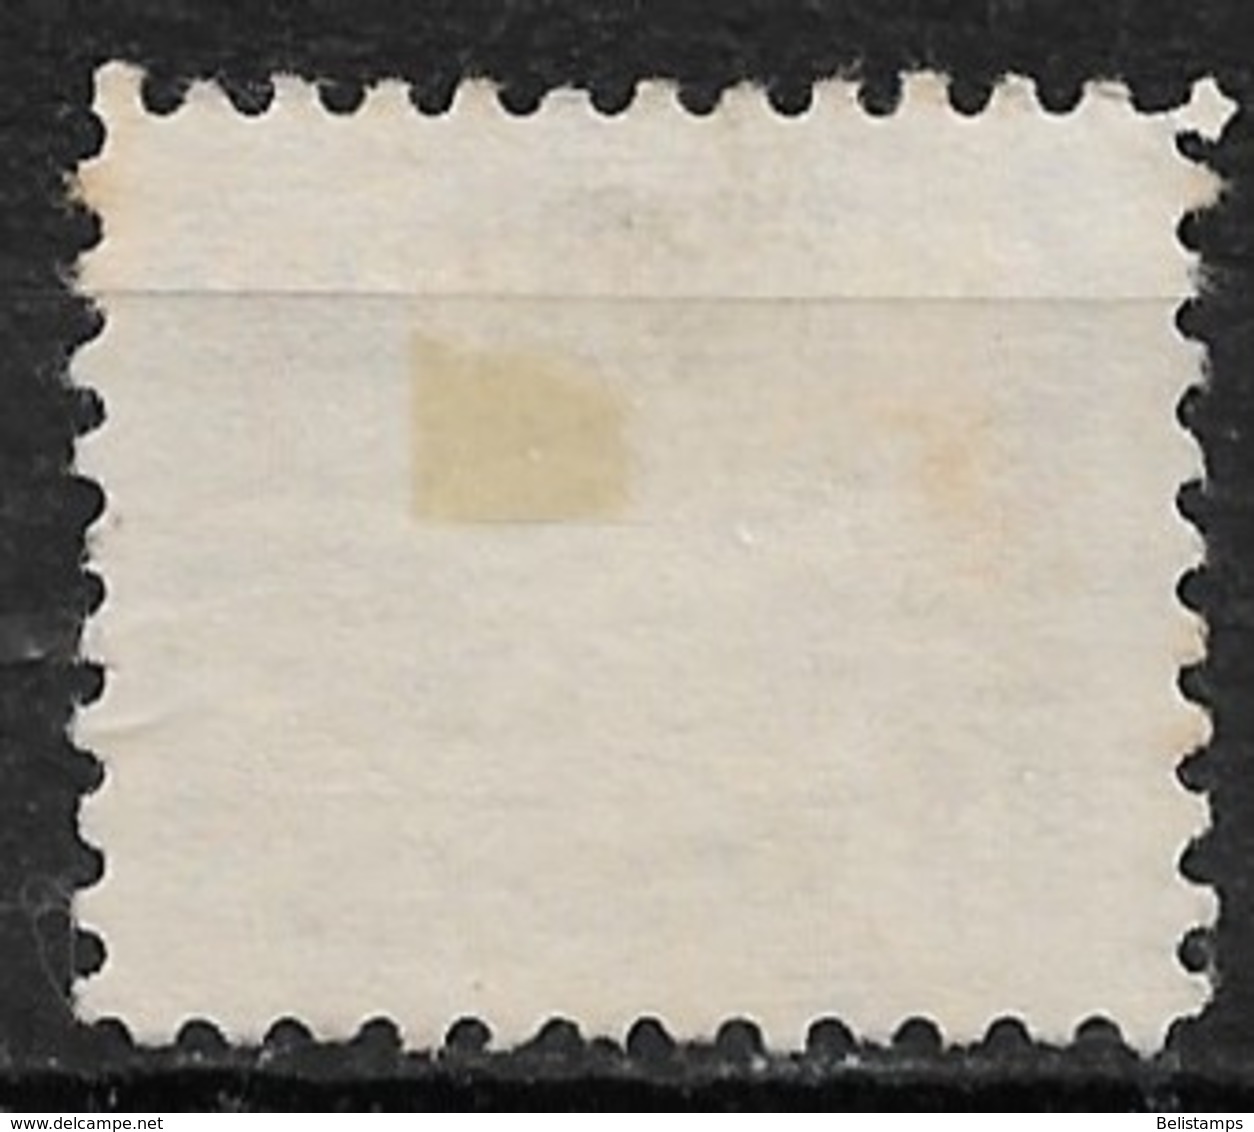 Cuba 1951. Scott #RA11 (U) Proposed Communications Building  (Complete Issue) - Postage Due